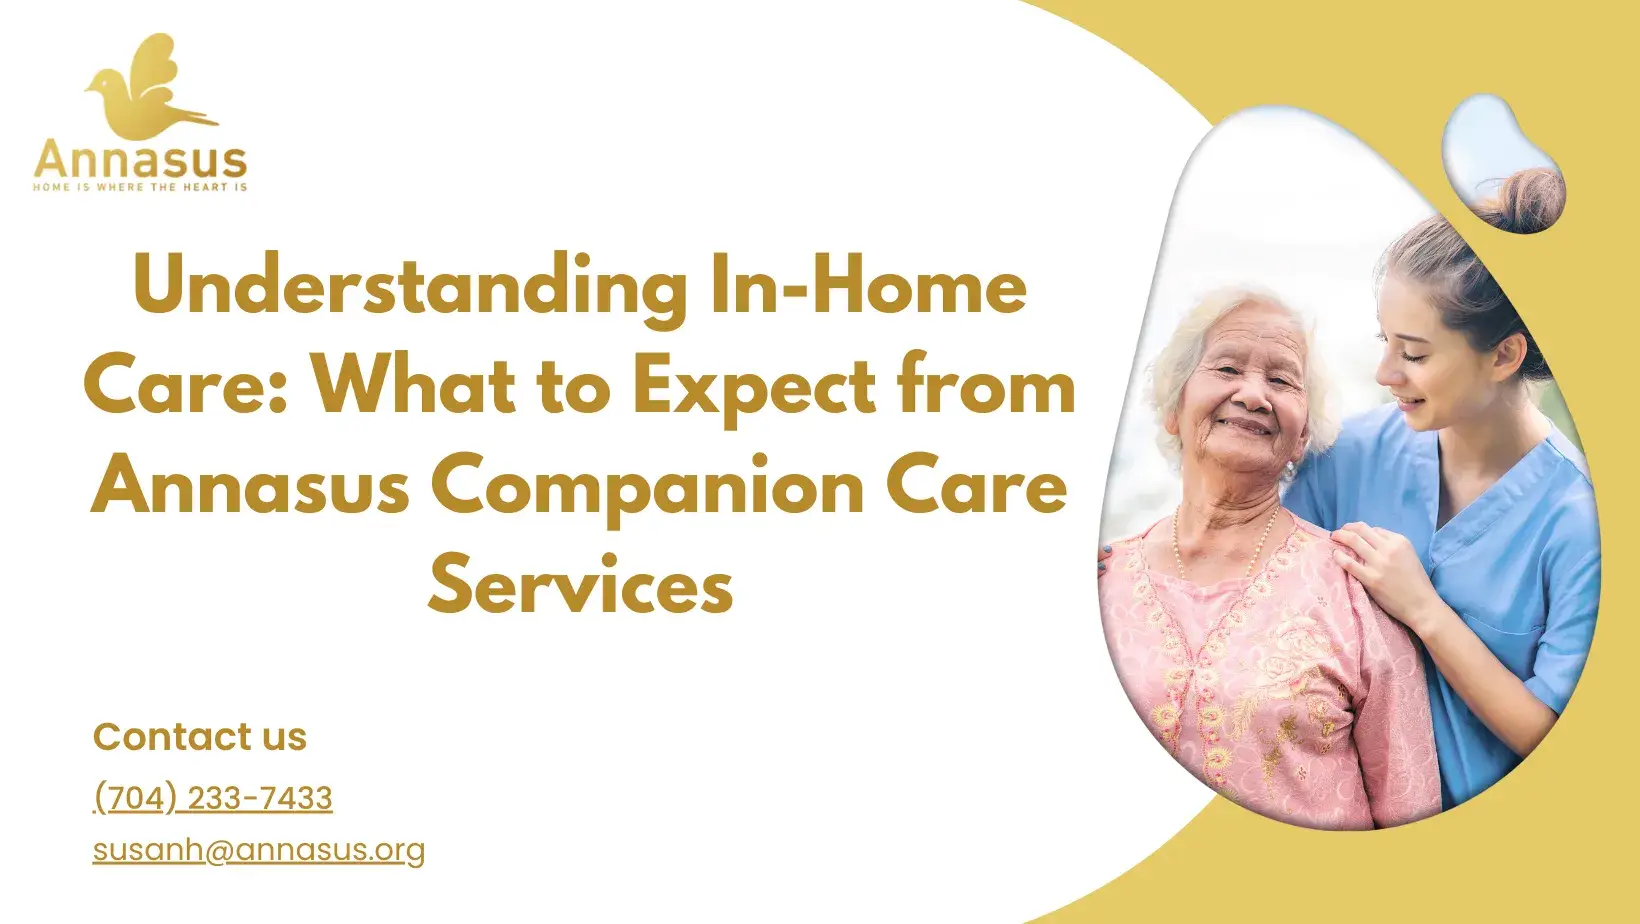 Understanding In-Home Care: What to Expect from Annasus Companion Care Services